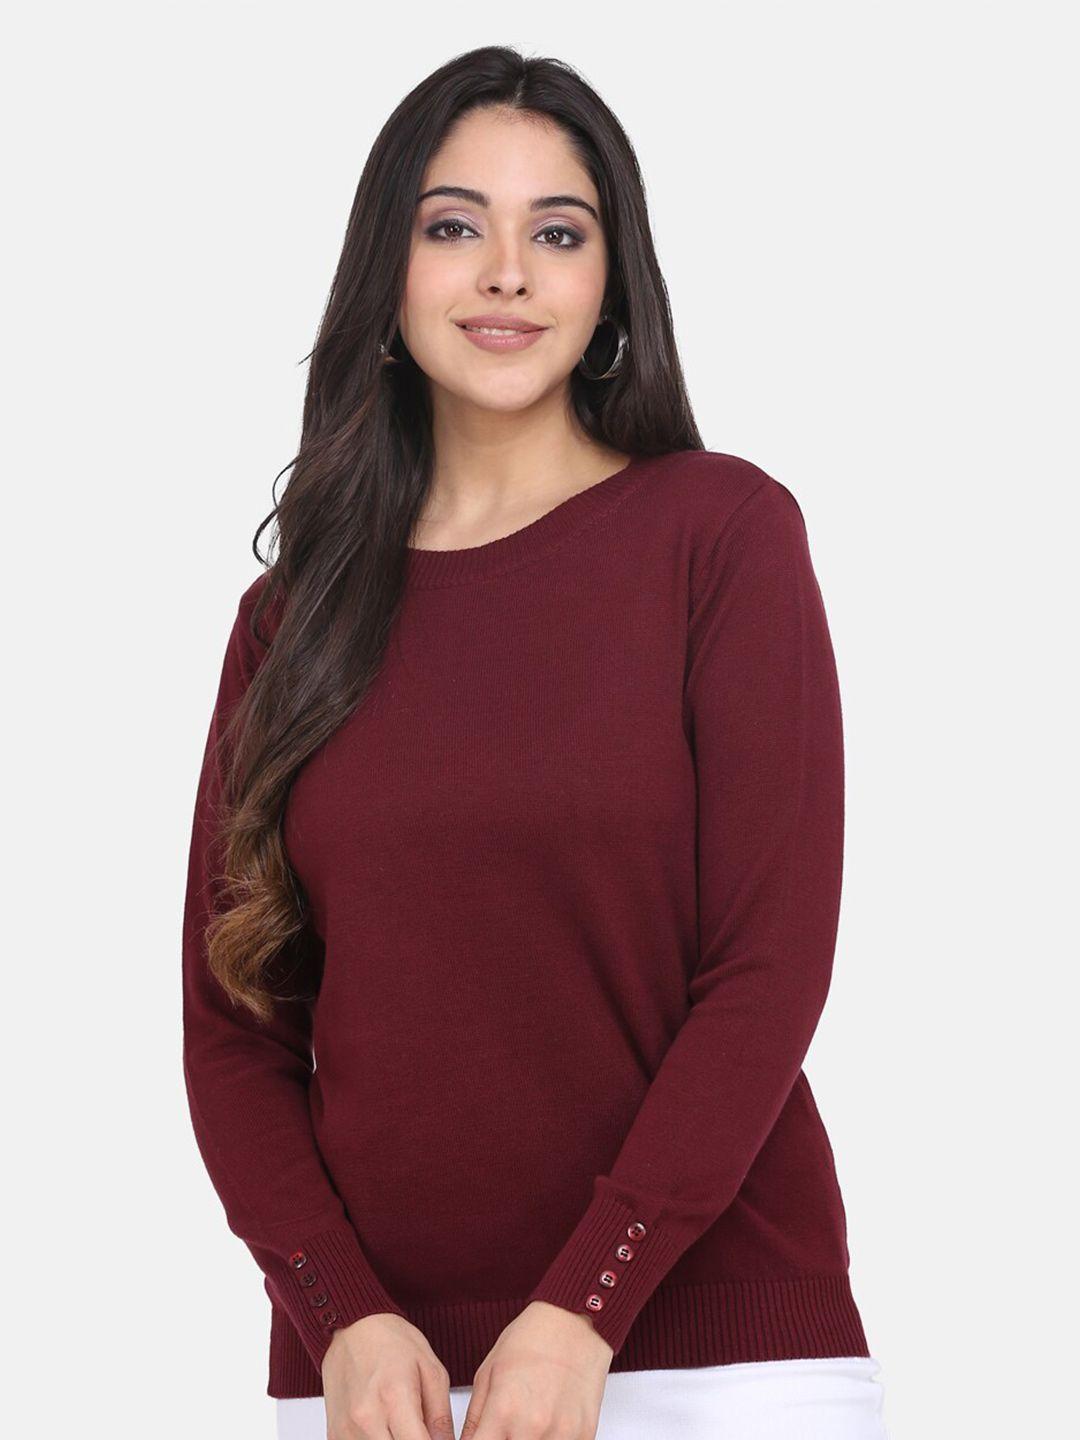 powersutra women red casual sweater